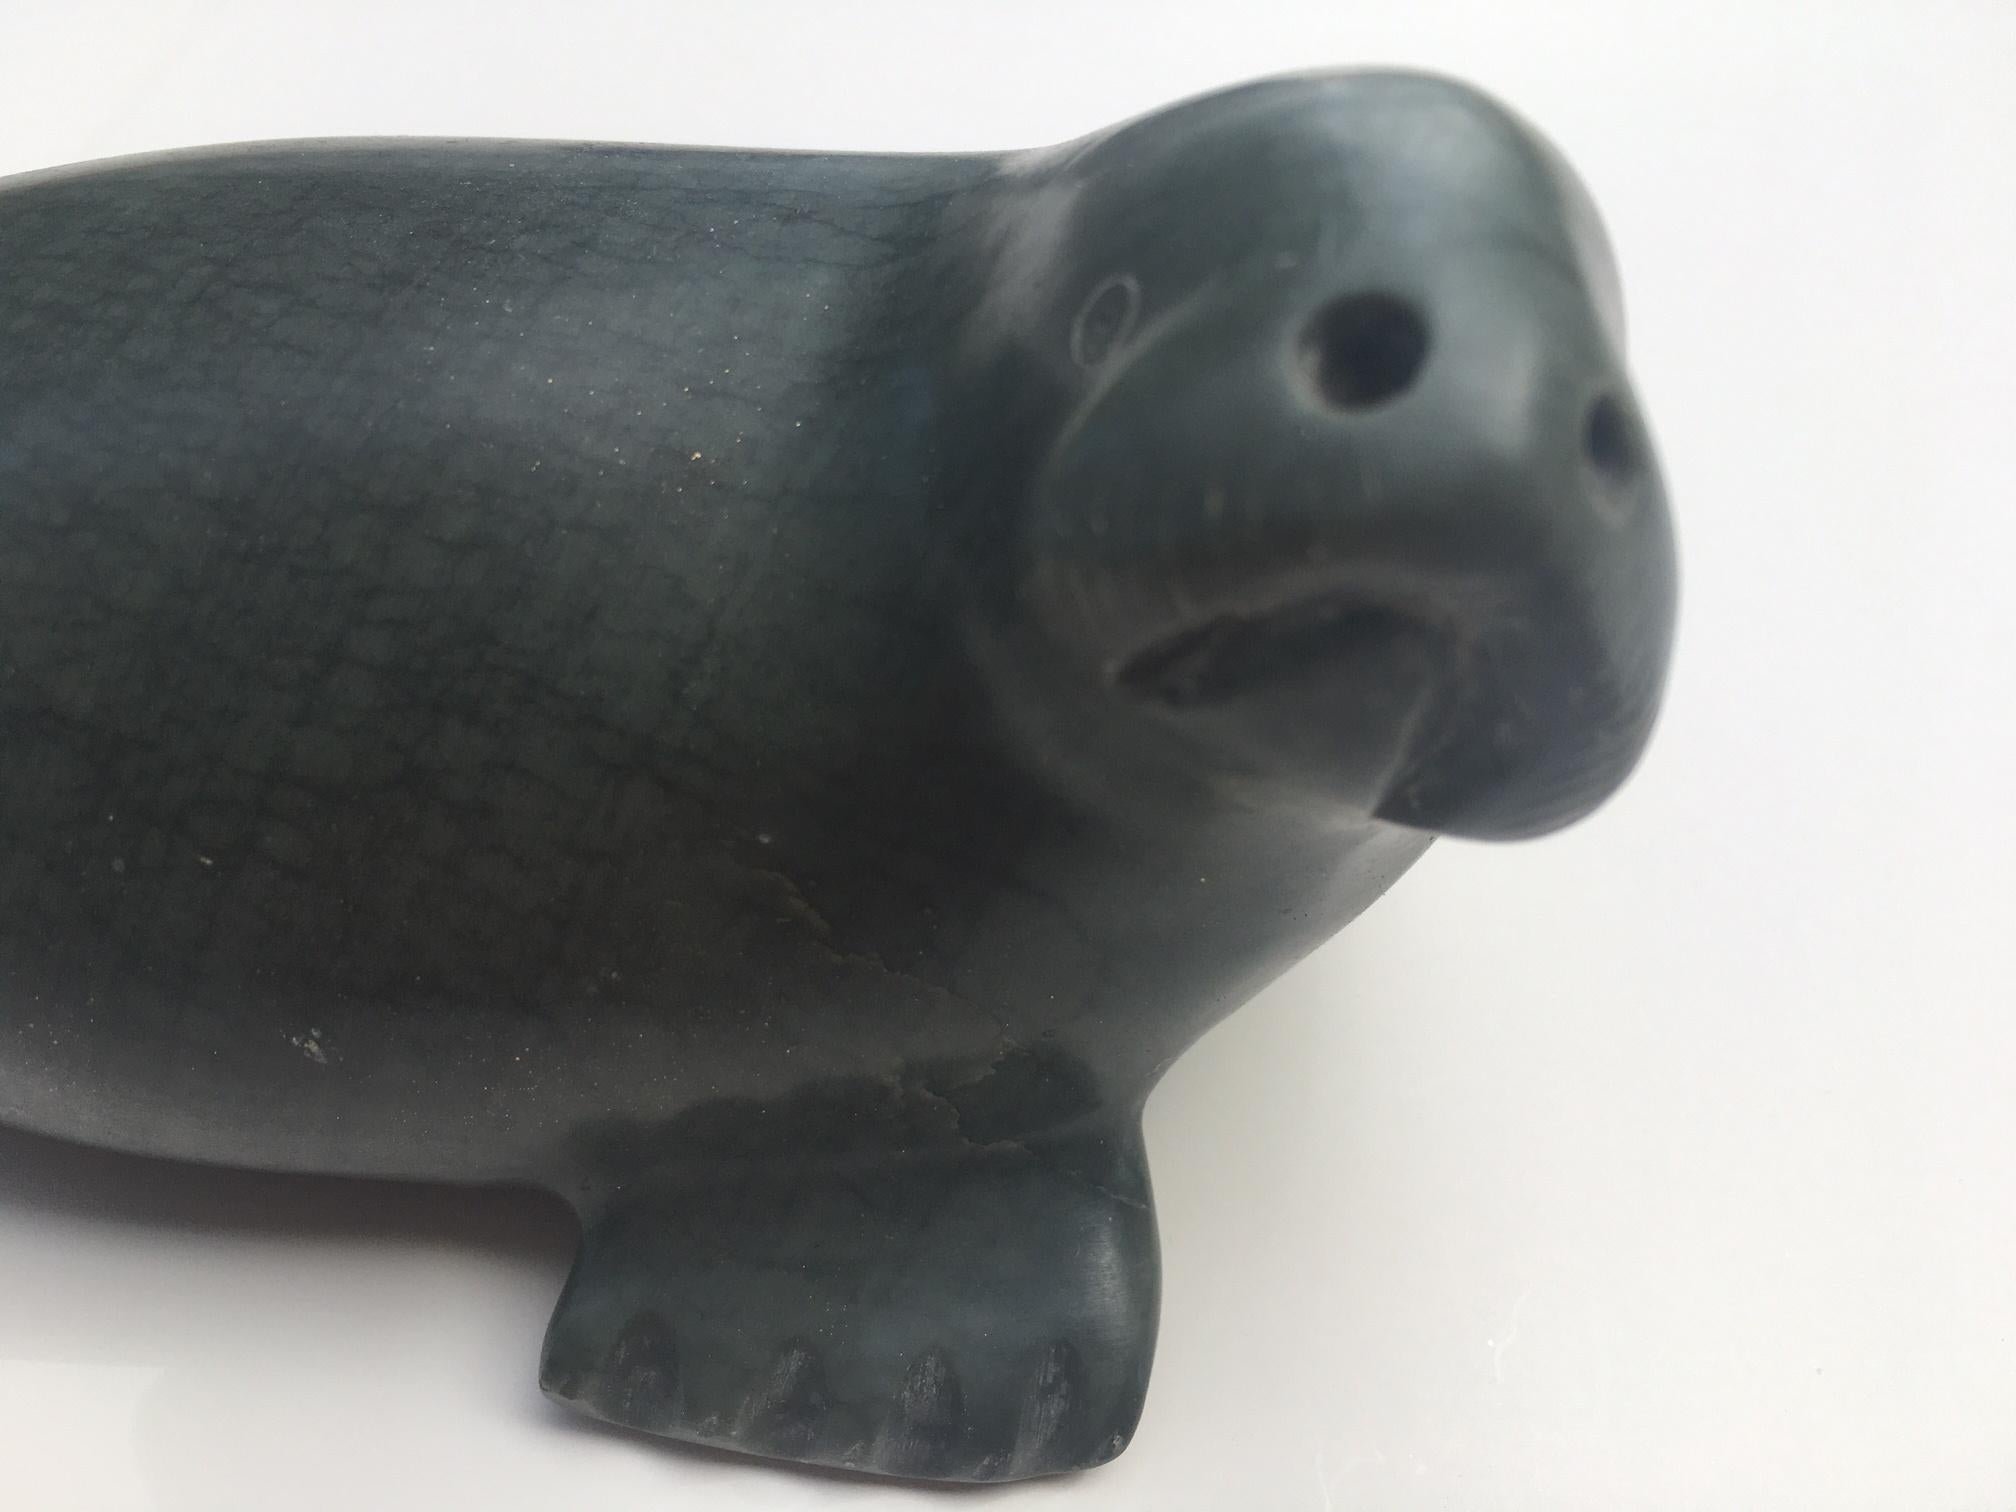 Inuit Stone Seal Sculpture Carving by Pauta Saila 1916 - 2009 For Sale ...